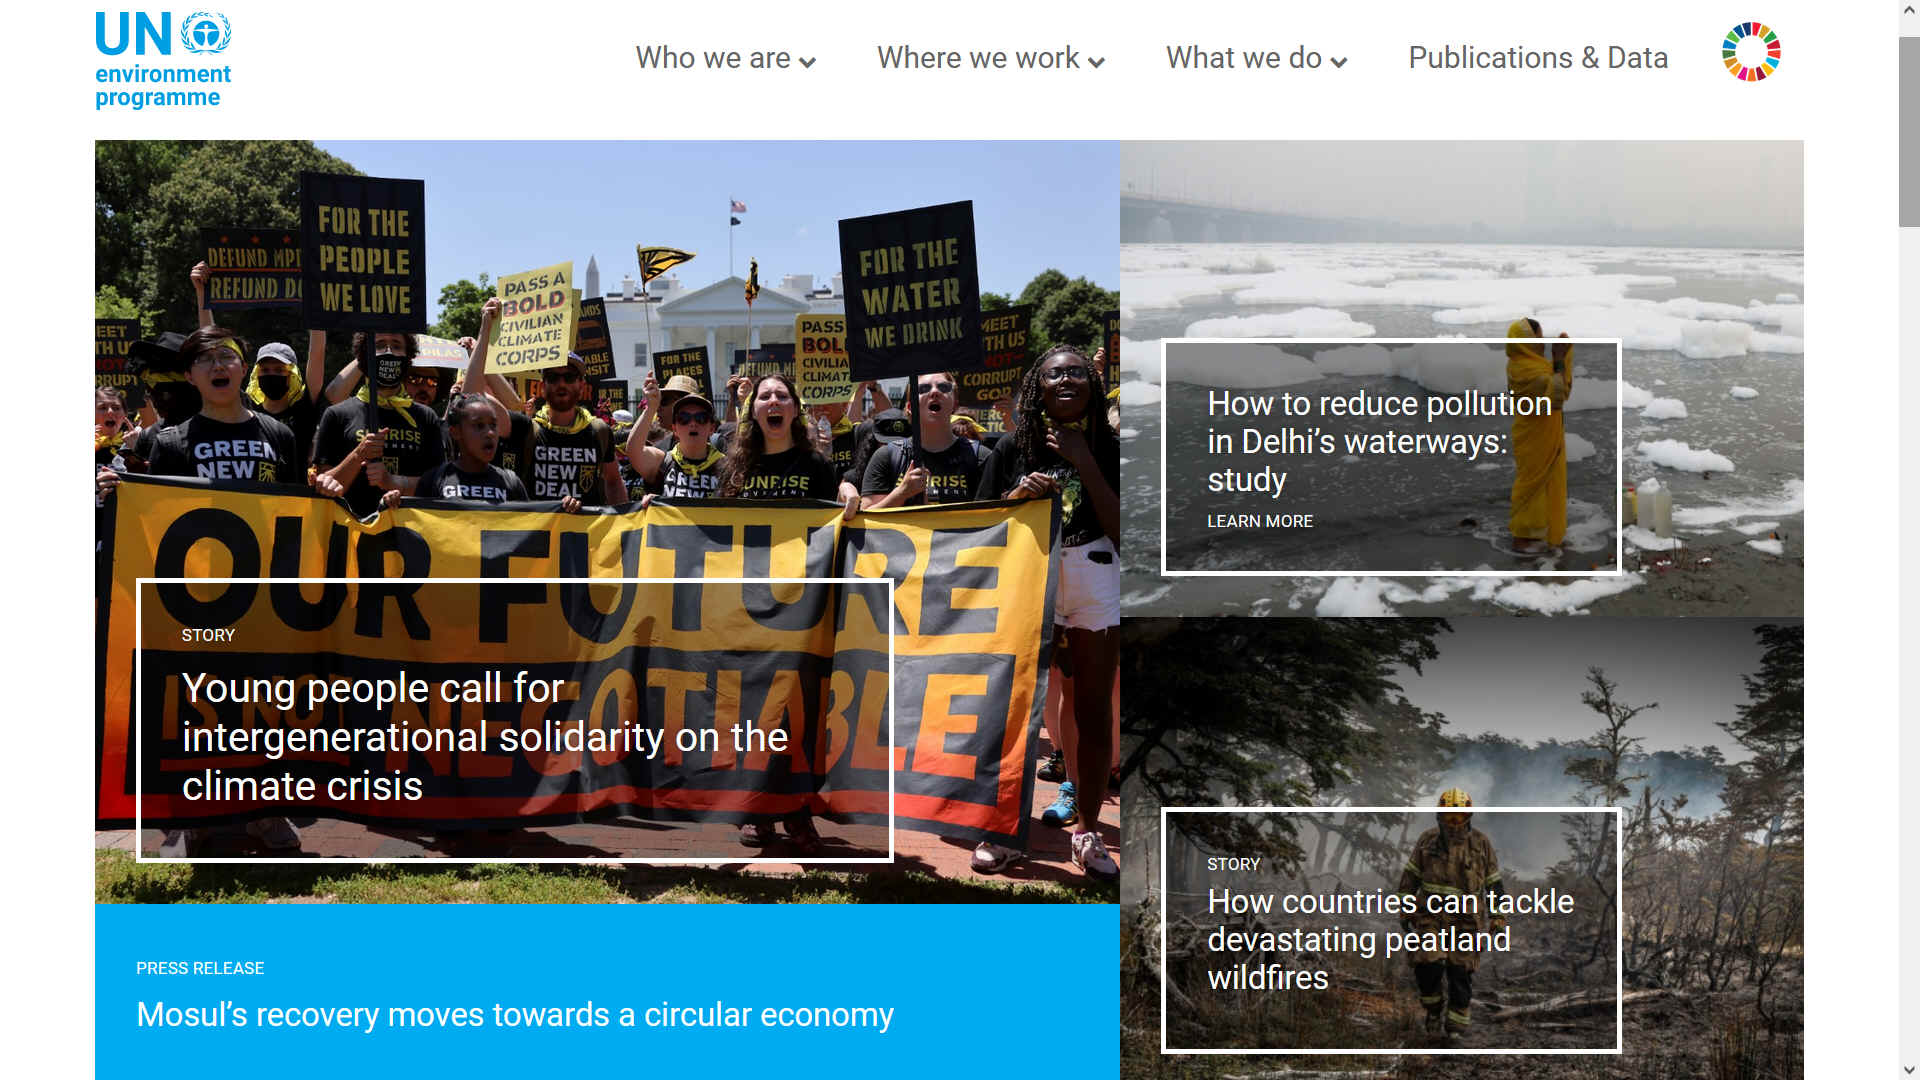 UNEP Environment Programme, young people call for solidarity on the climate crisis